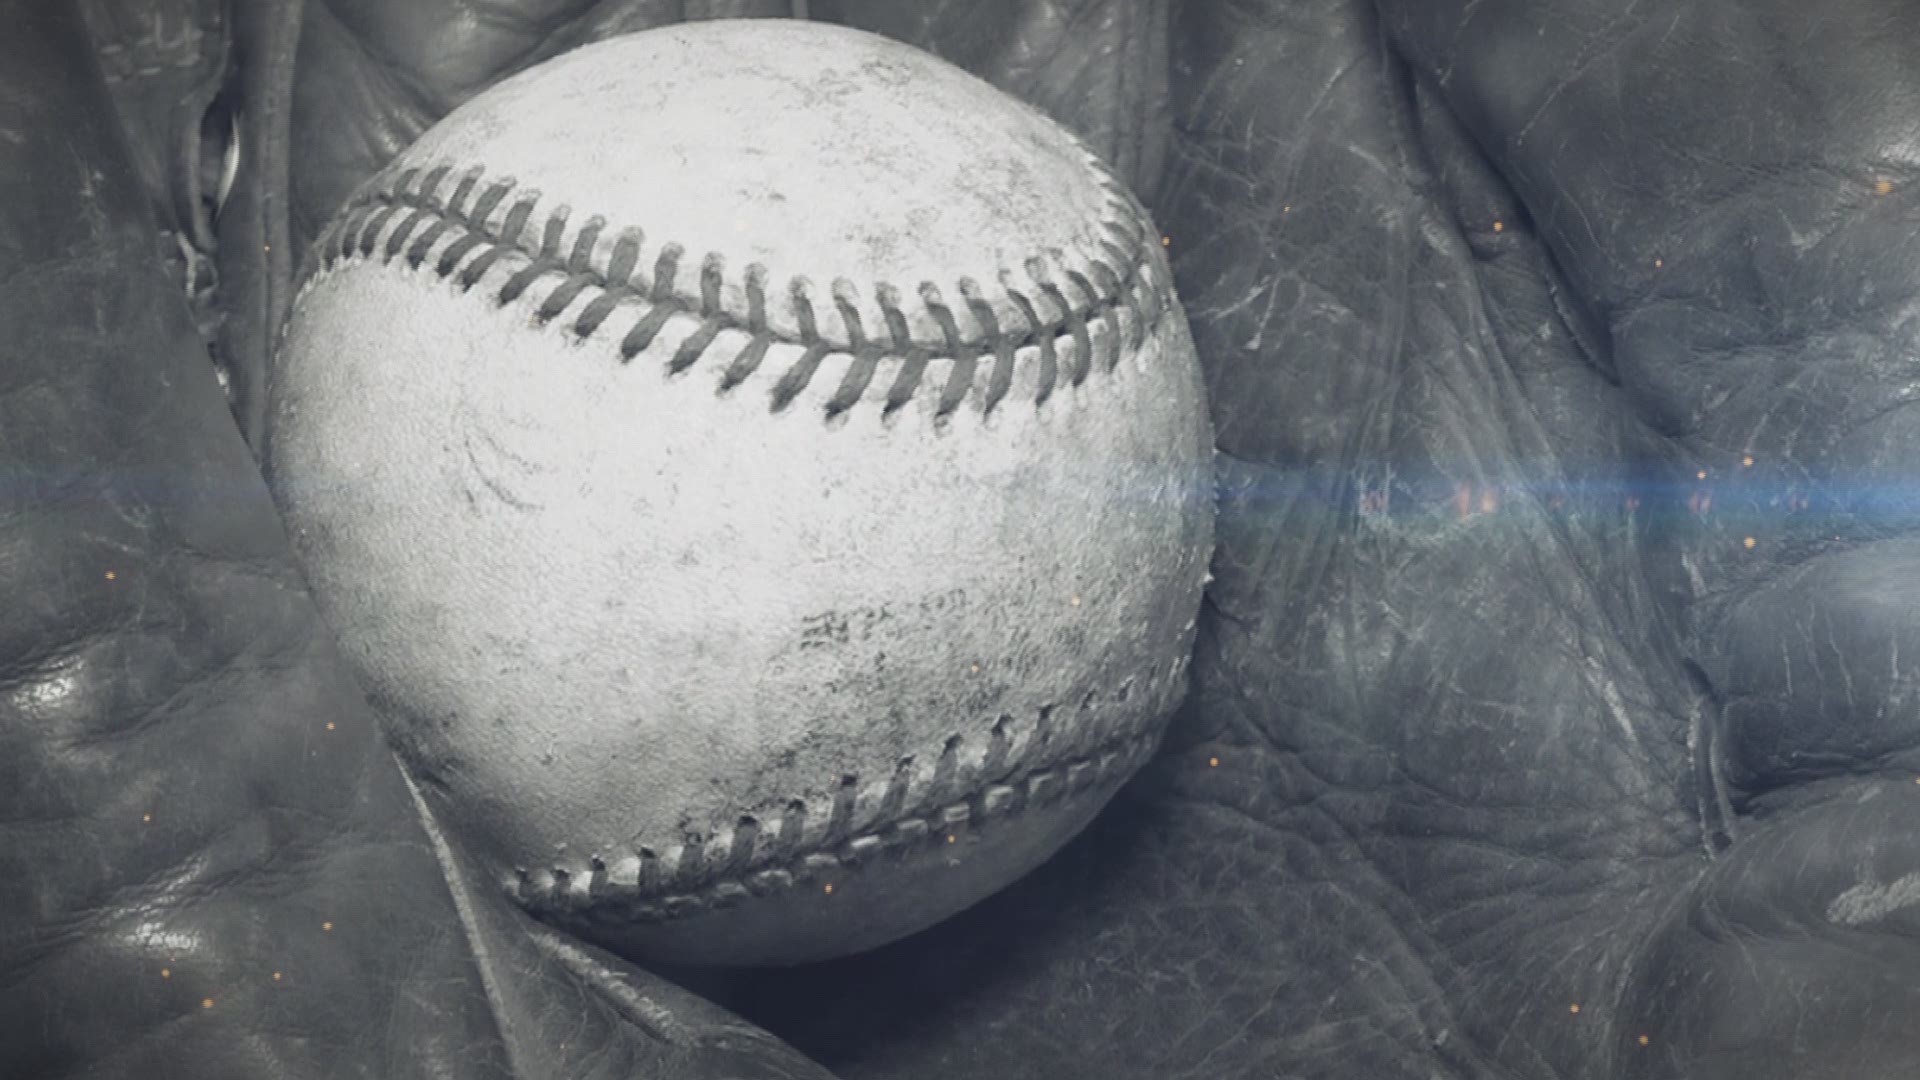 While baseball feels like a game, it's much more than that in the Cayce community. It's about the friendships and bonds you create that last a lifetime. The Cayce Dixie Youth Baseball League team takes a look back at their 1964 World Series Championship and the memories they made.